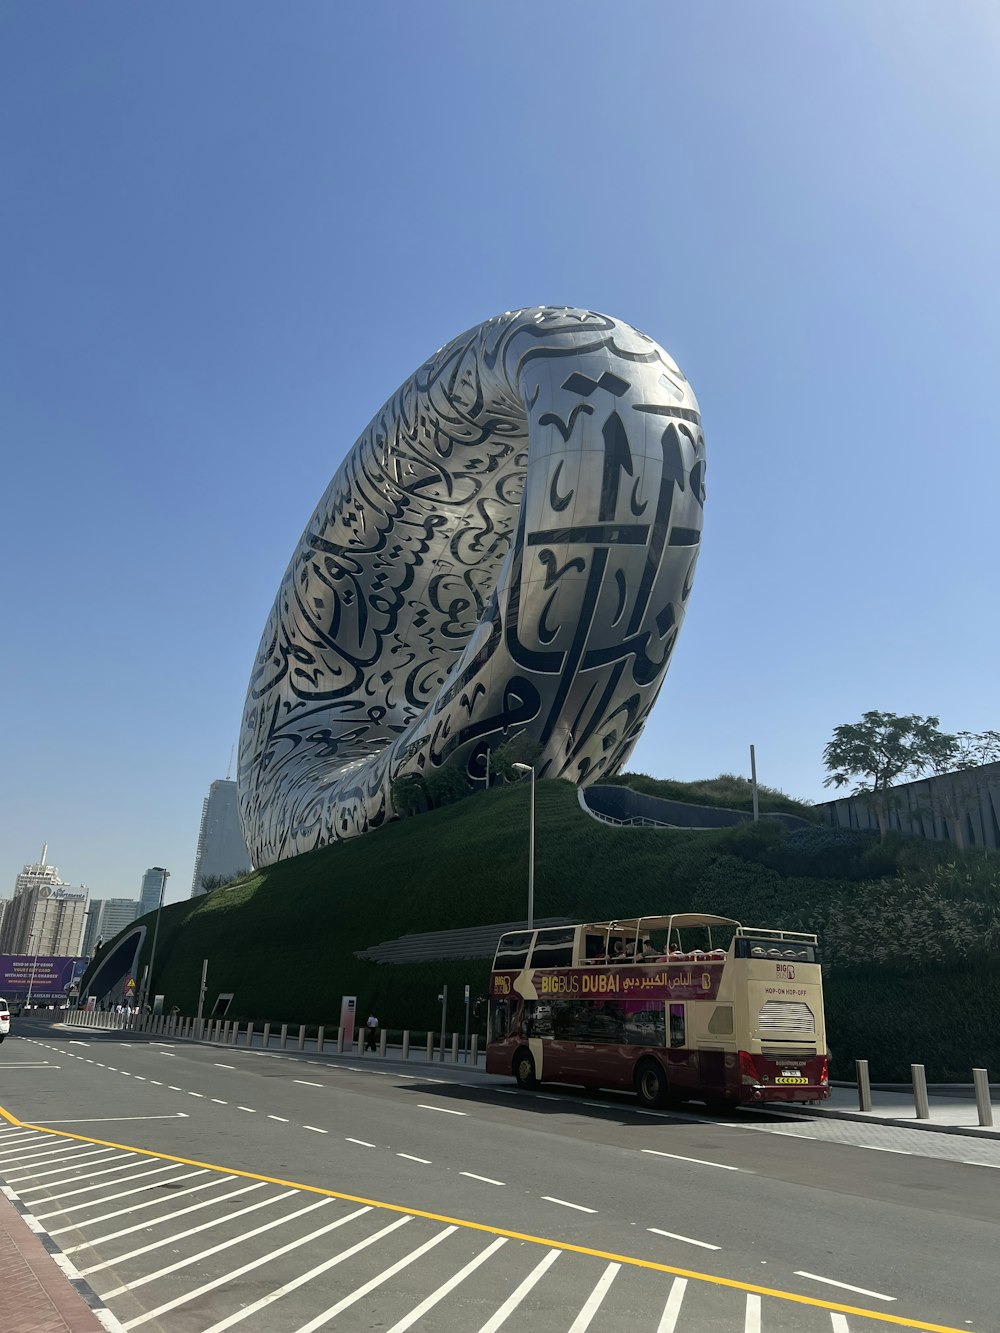 a bus parked in front of a large sculpture